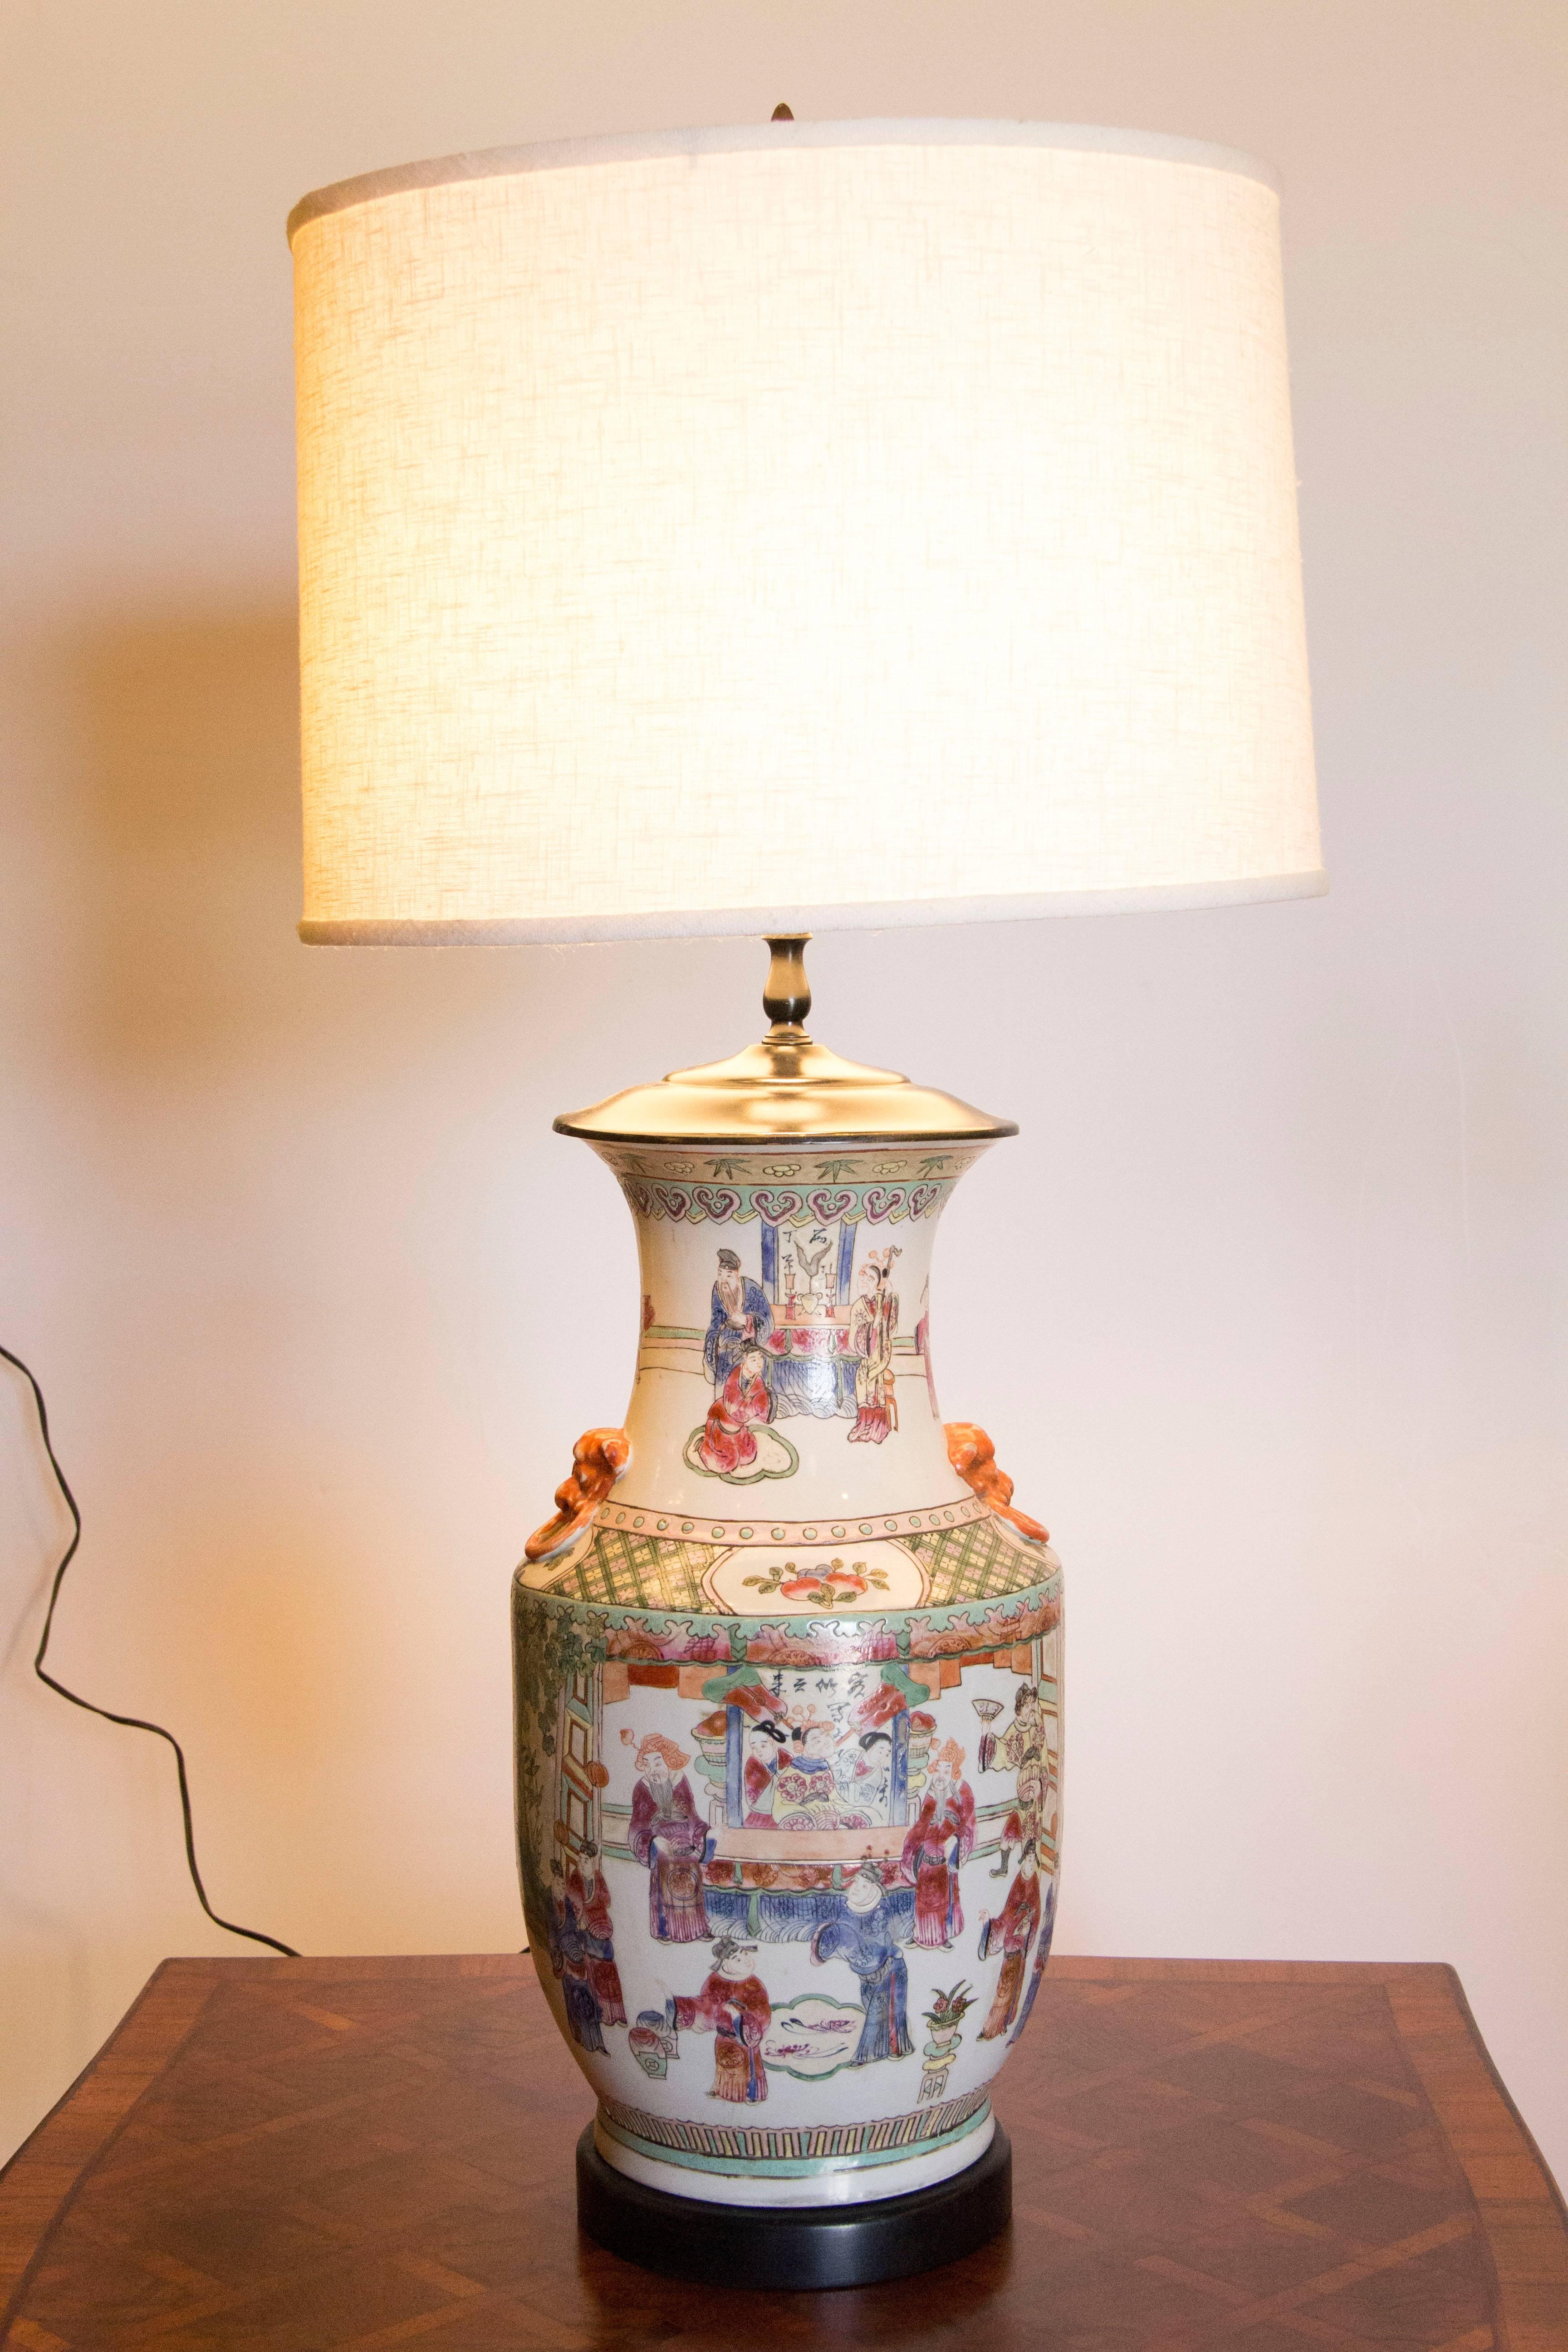 Lovely hand-painted Chinese lamp with court scenes and delicately painted figural detail. 


Measure: overall height 34